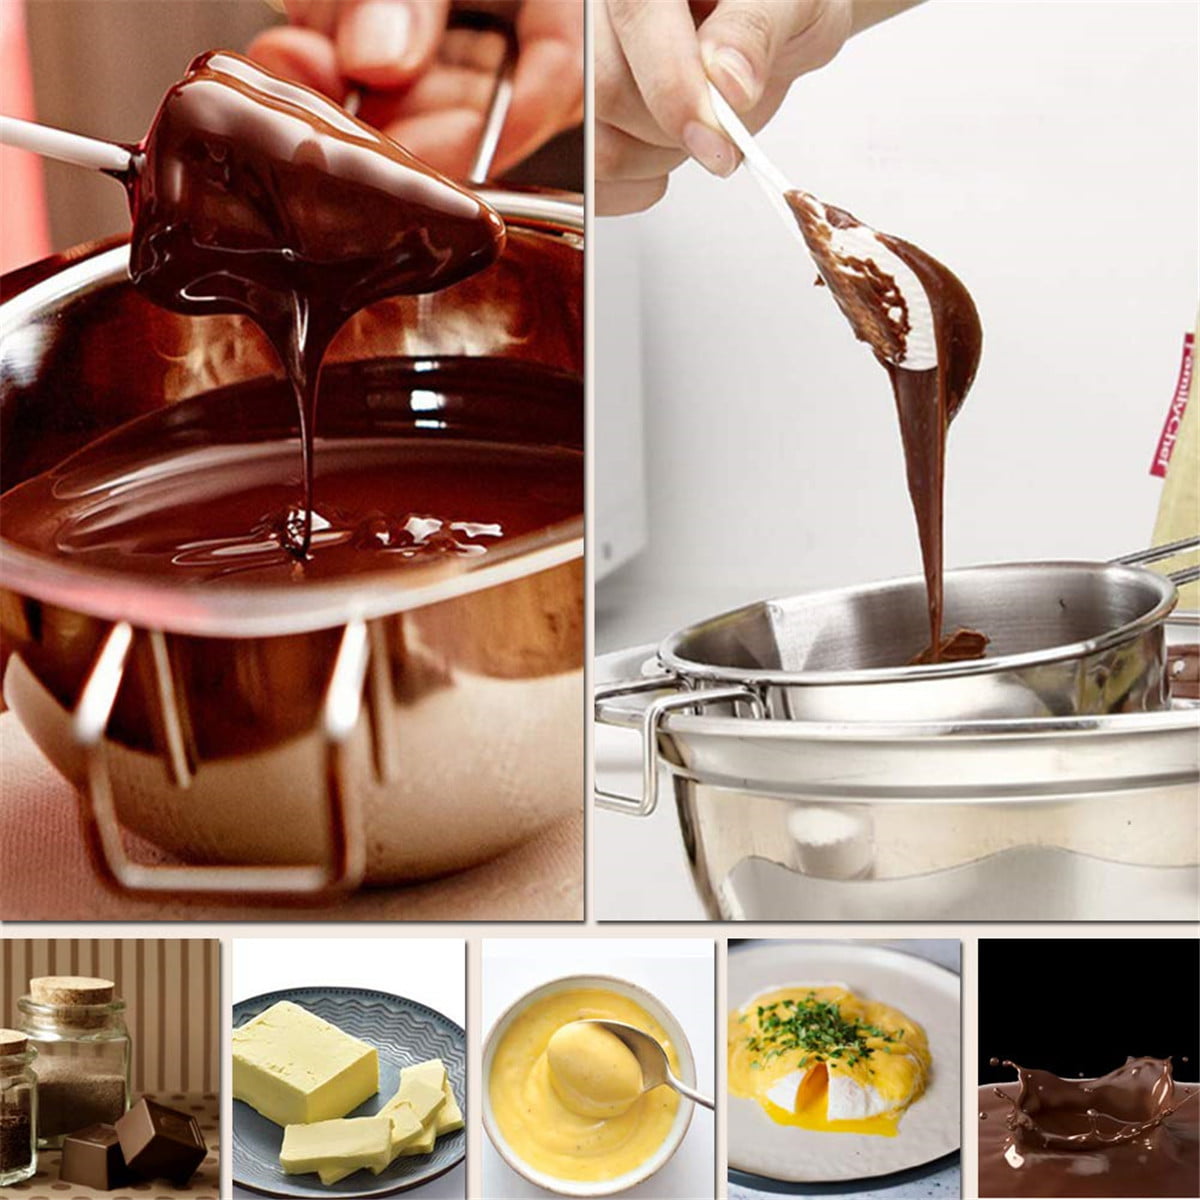 Double Boiler Universal Insert,Melting Pot for Butter Chocolate Cheese Caramel Neeshow Stainless Steel Universal Double Boiler，Baking Tools Silver Handle, 480 18/8 Steel 